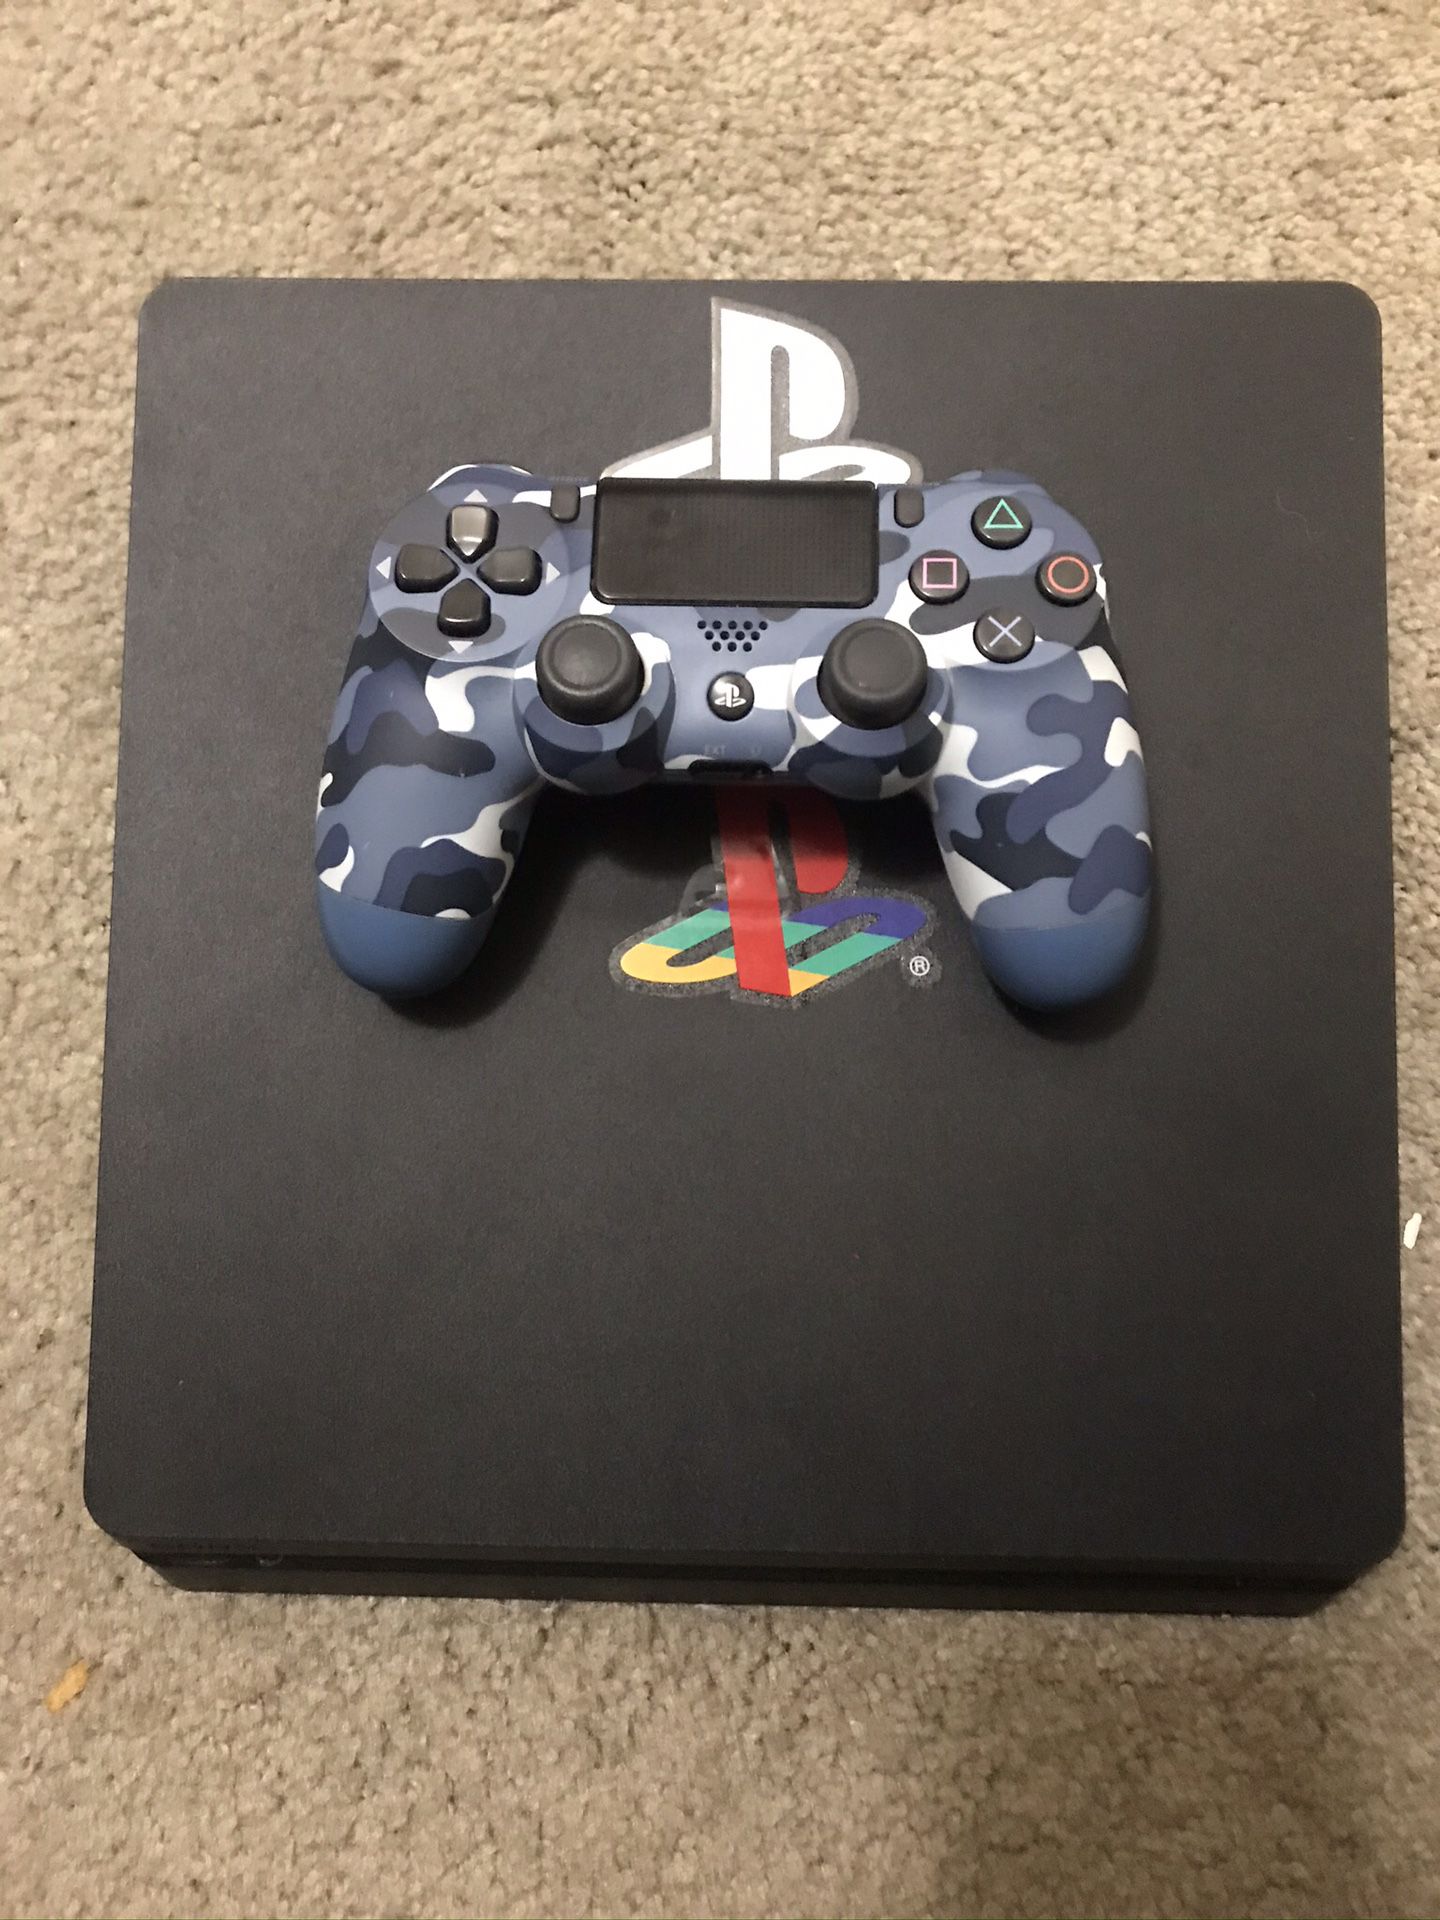 PlayStation 4 slim/PS4 slim with controller